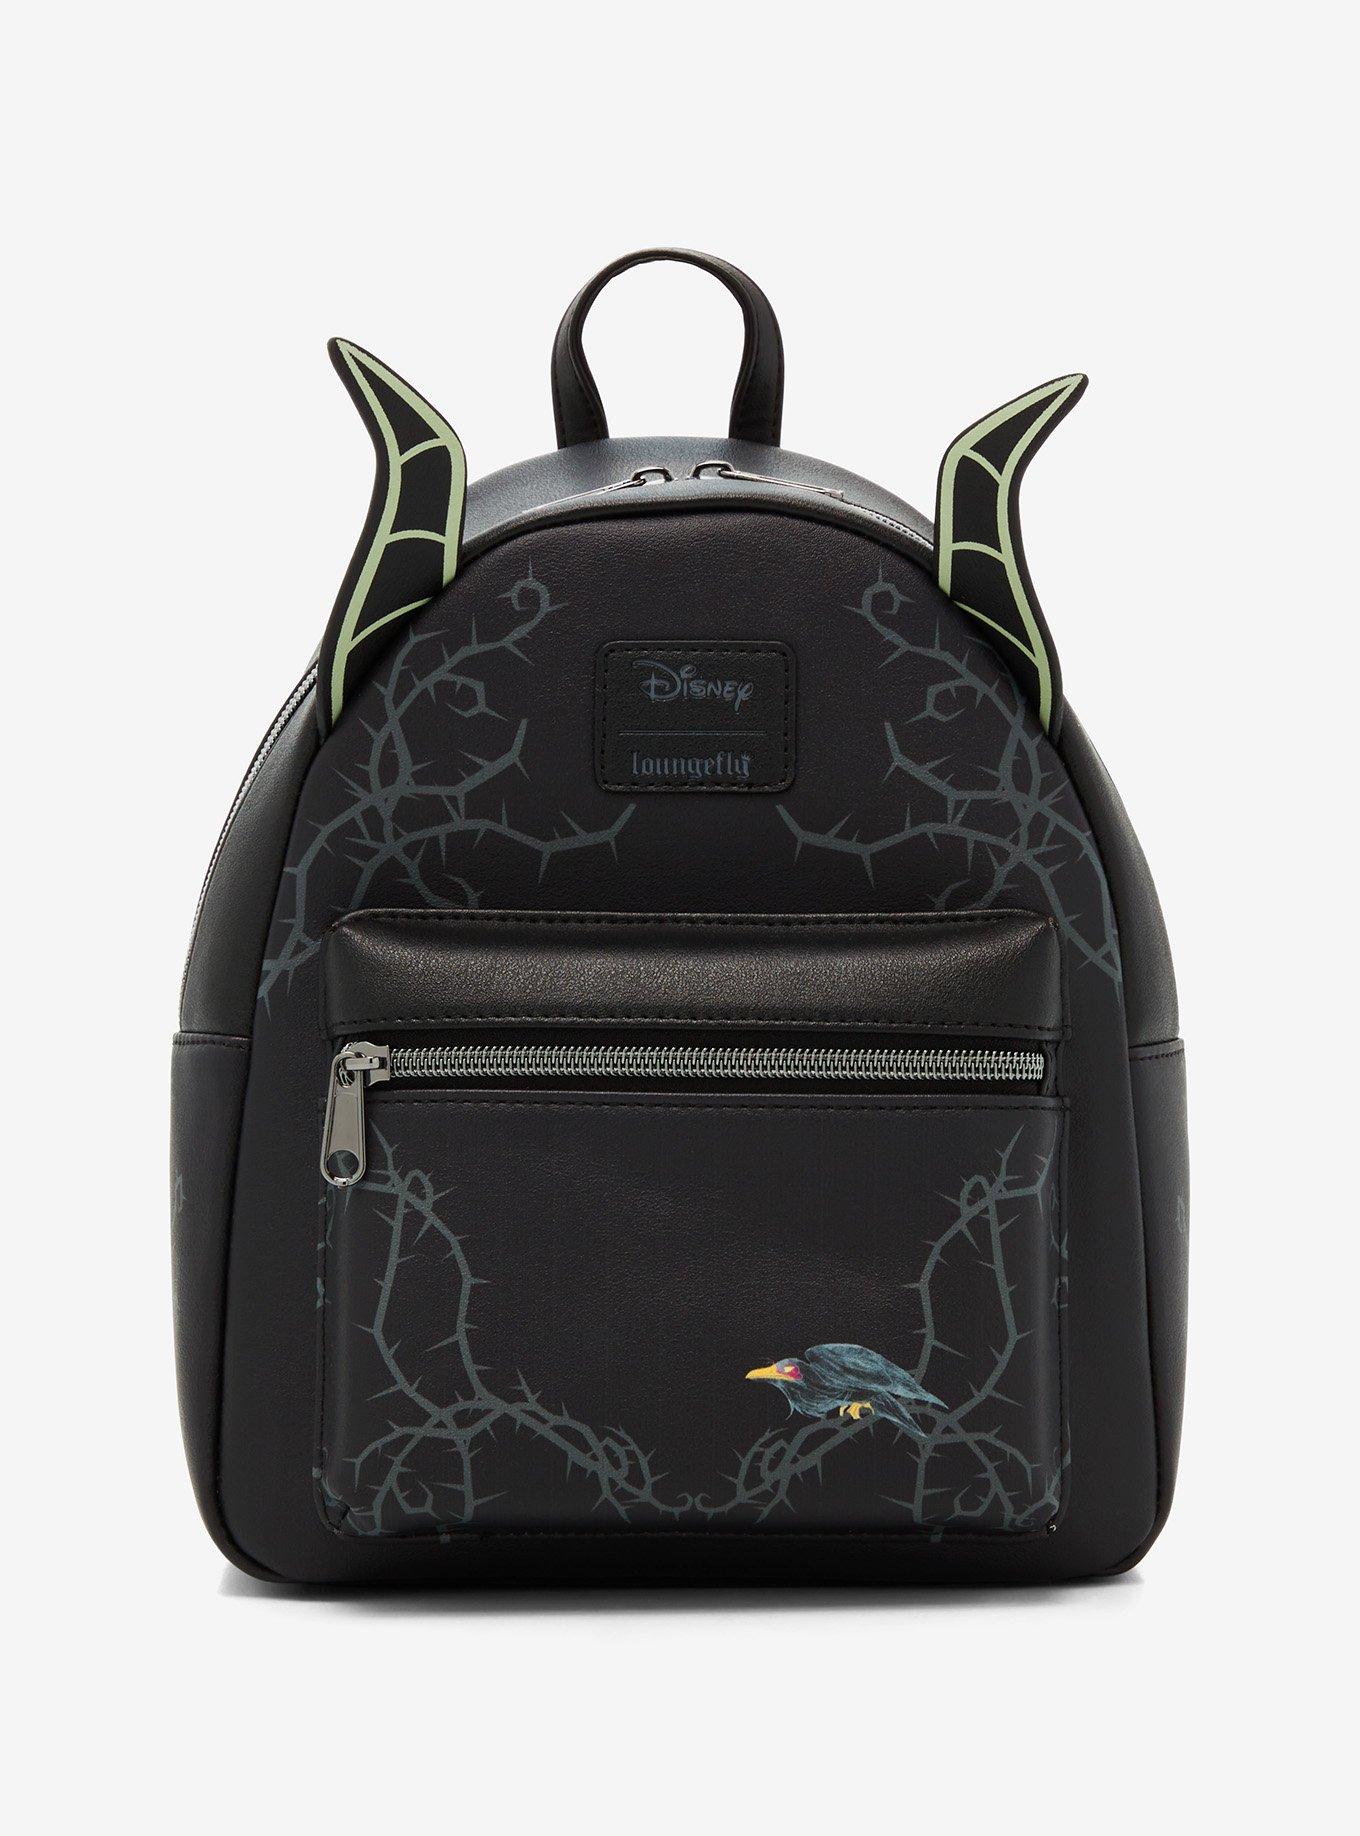 Disney Maleficent Backpack High Quality Anime Witch Cartoon